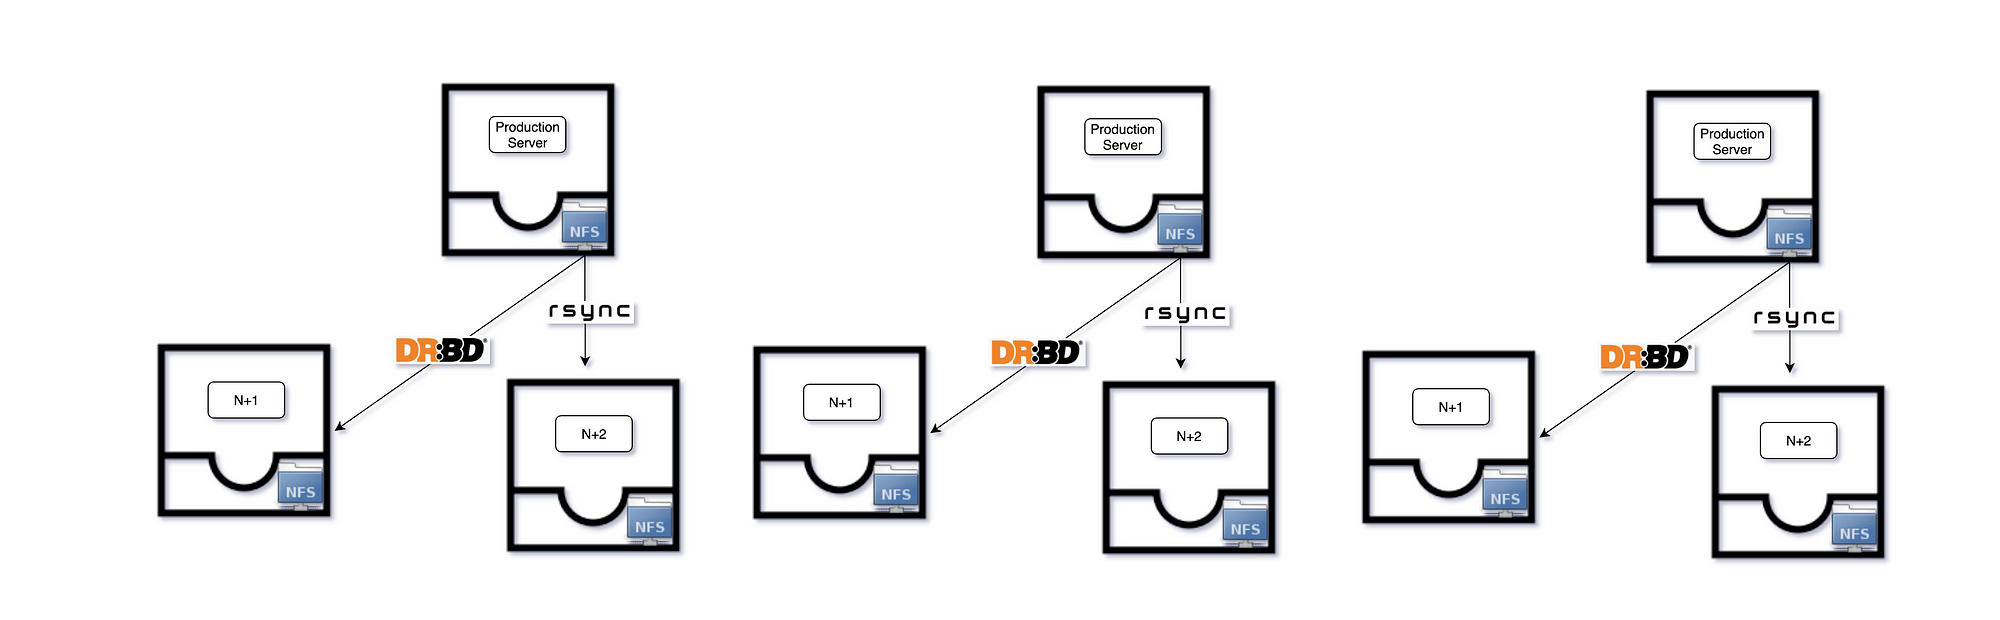 DRBD vs rsync. Needed a solution to sync data for our… | by Vito Leung |  Medium